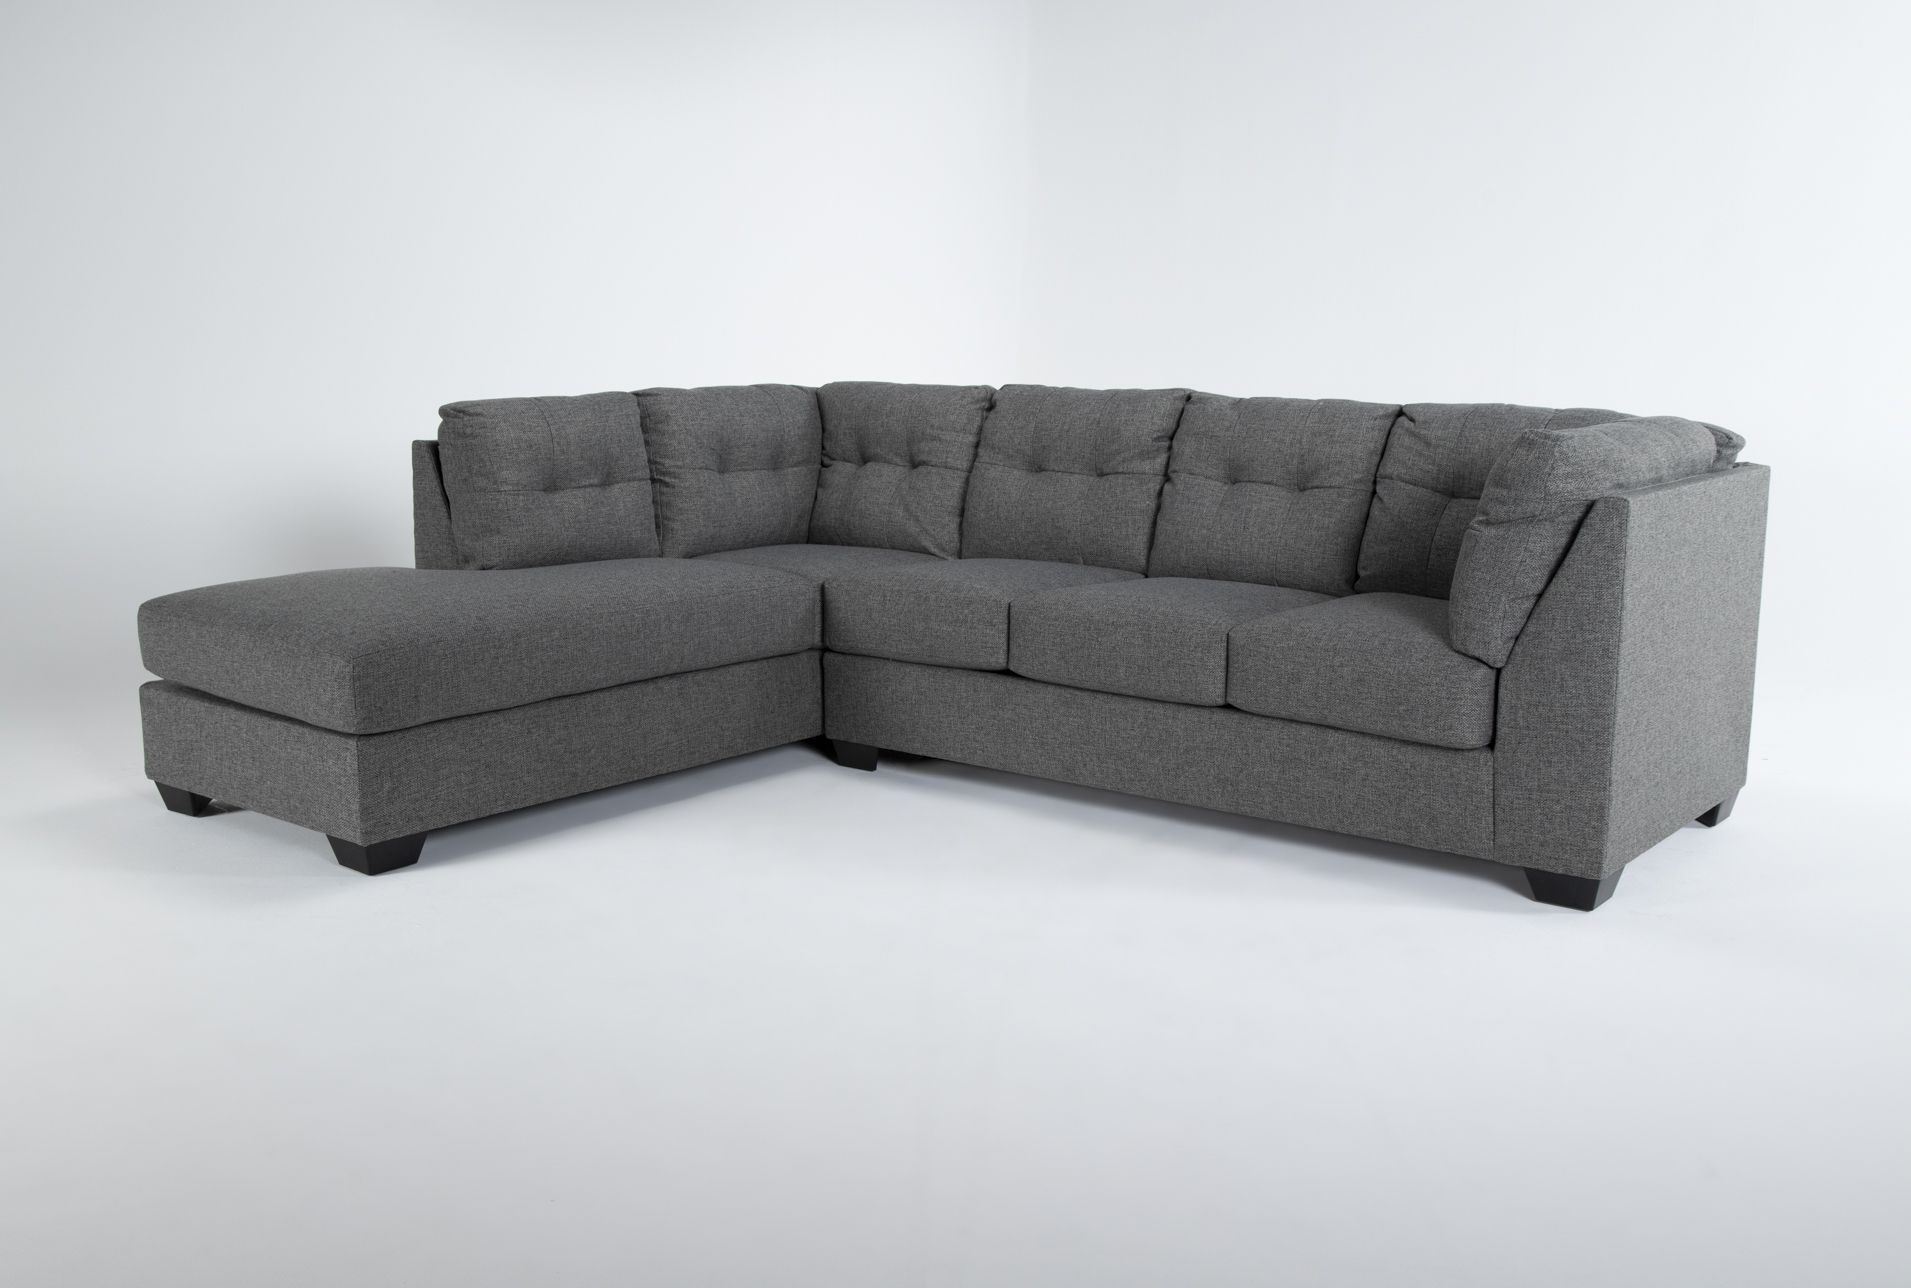 Arrowmask Charcoal 2 Piece 115" Full Sleeper Sectional With Left Arm Within Left Or Right Facing Sleeper Sectionals (View 4 of 21)